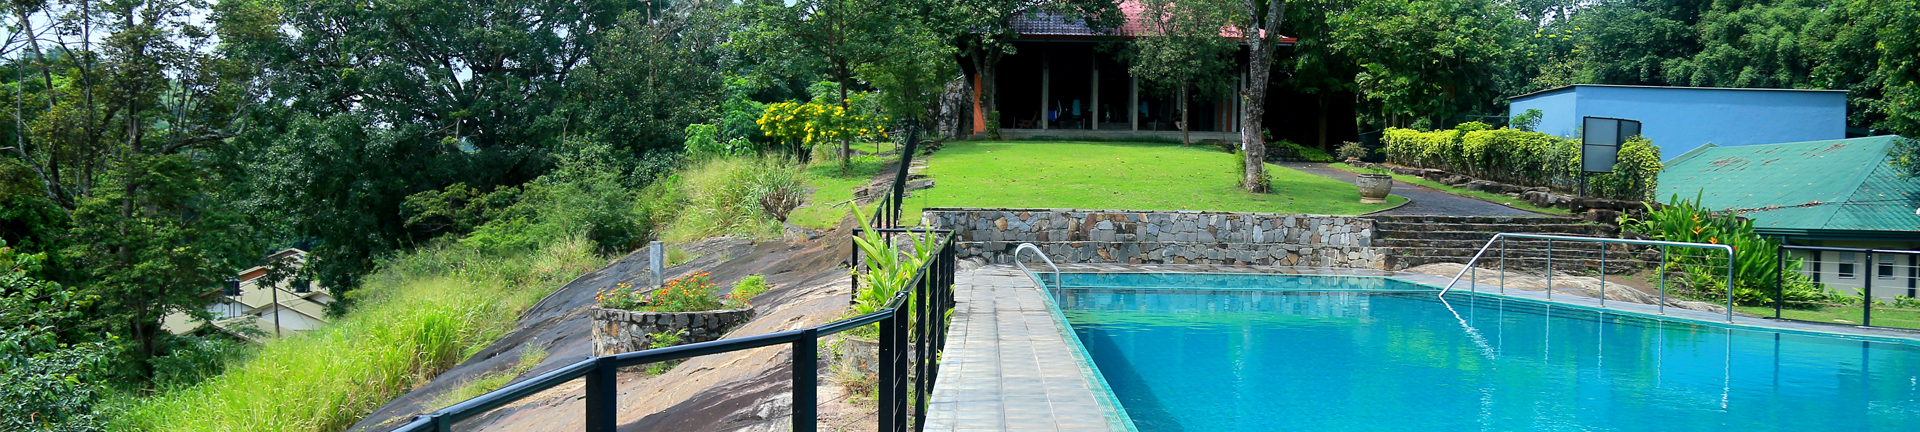 Holiday Bungalow in Kandy - Cover Photos